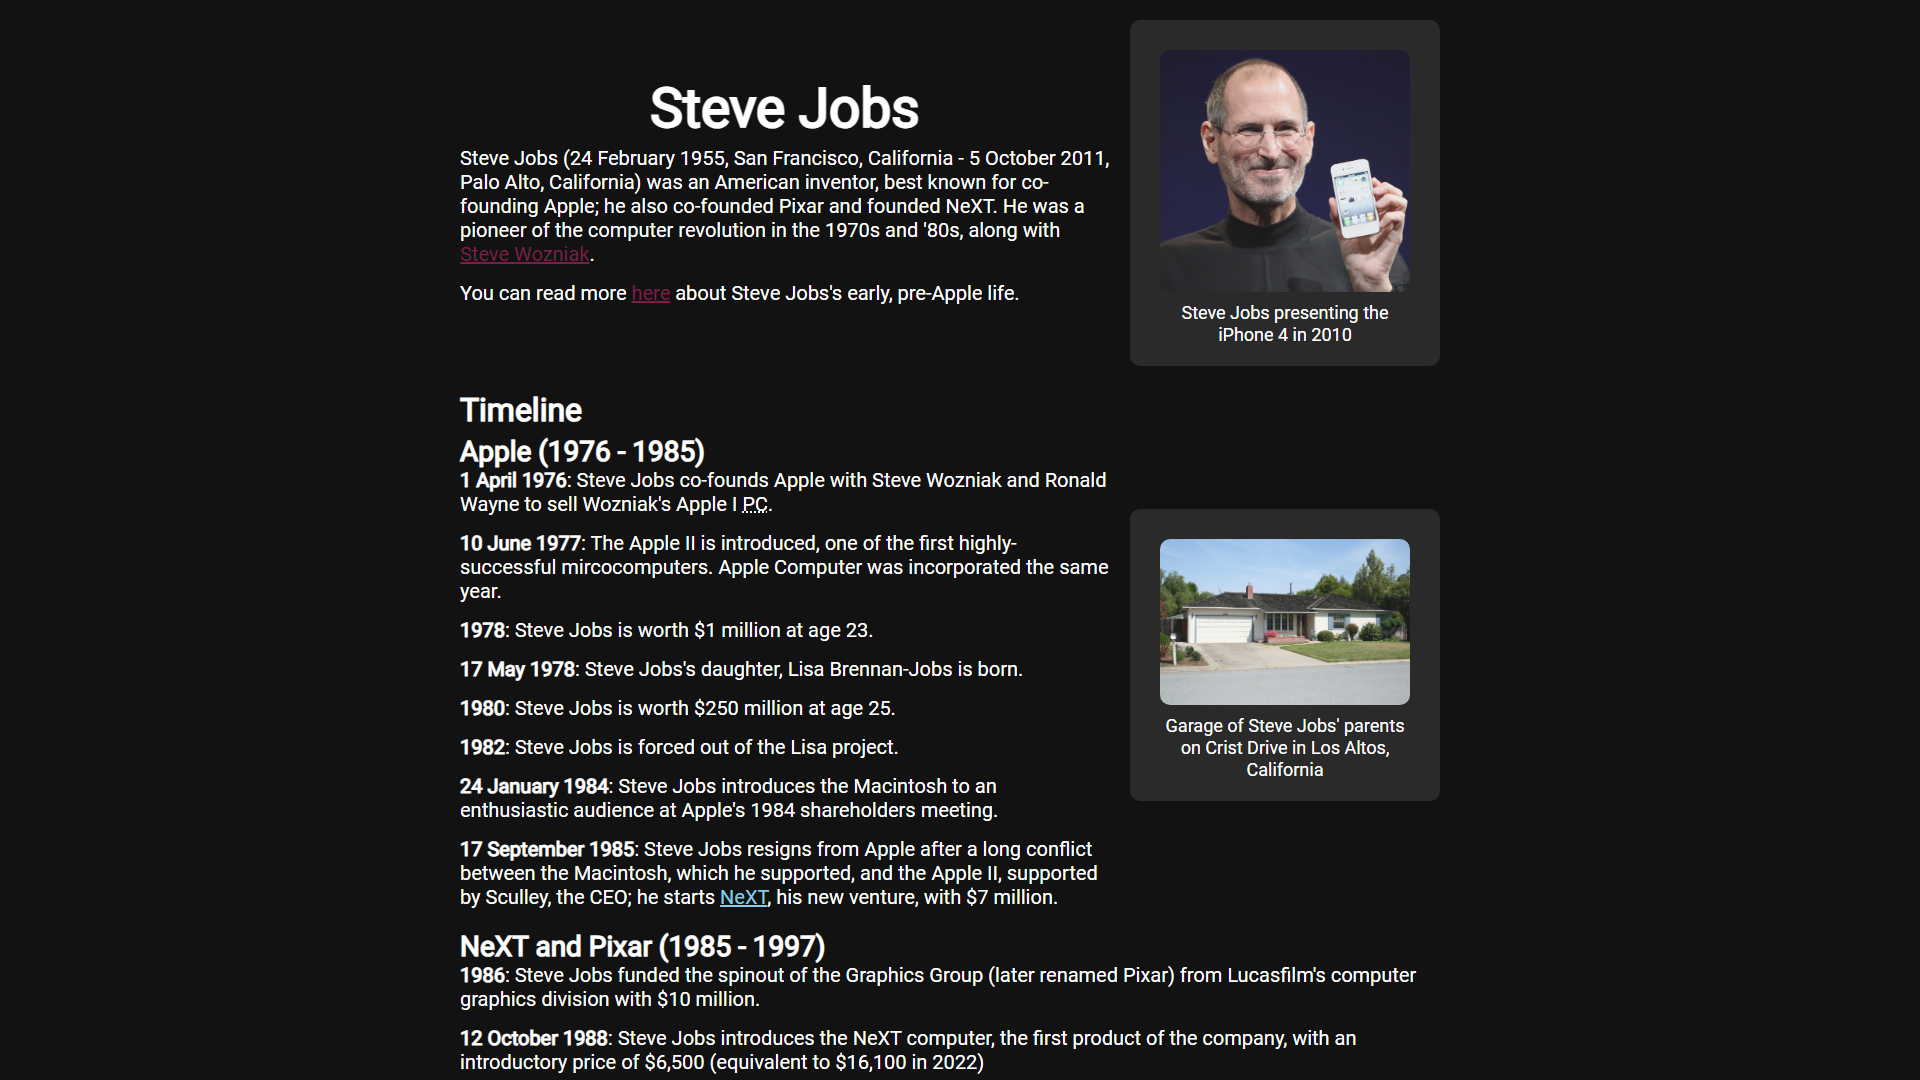 Steve Jobs tribute page